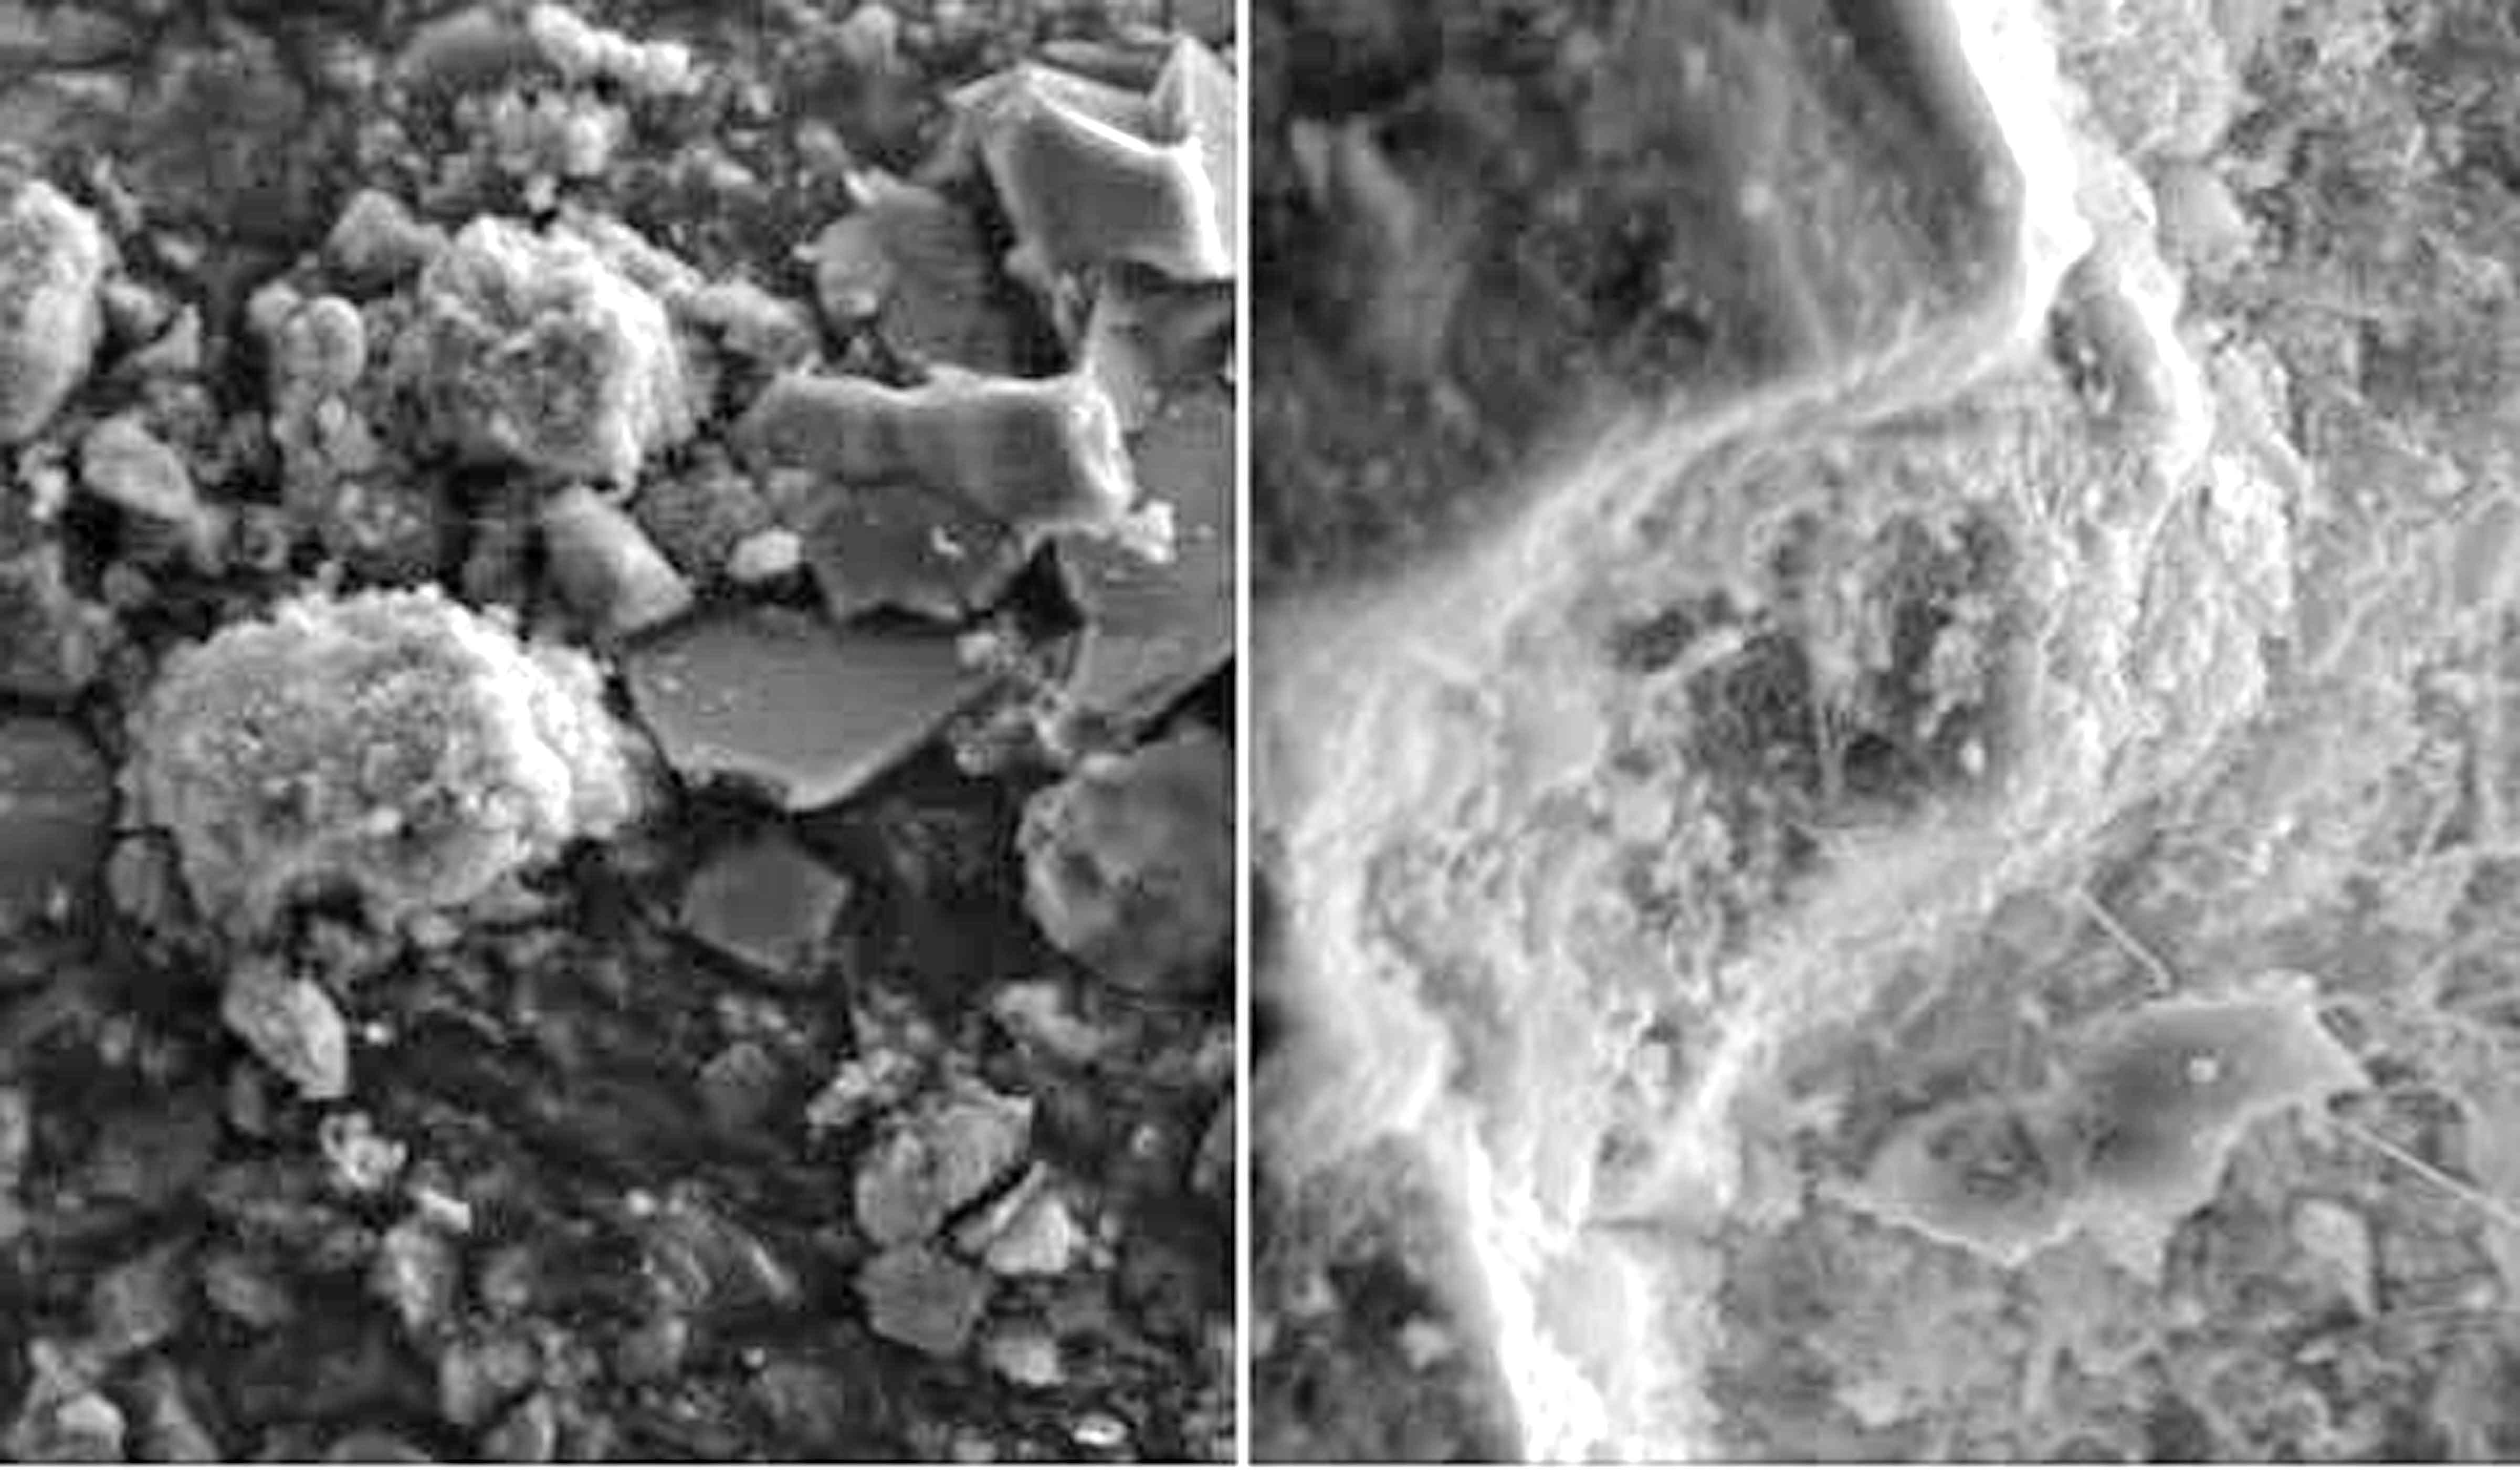 Two photographs show scanning electron microscope images of samples of crushed fines from recycled concrete modified with nano silicon dioxide